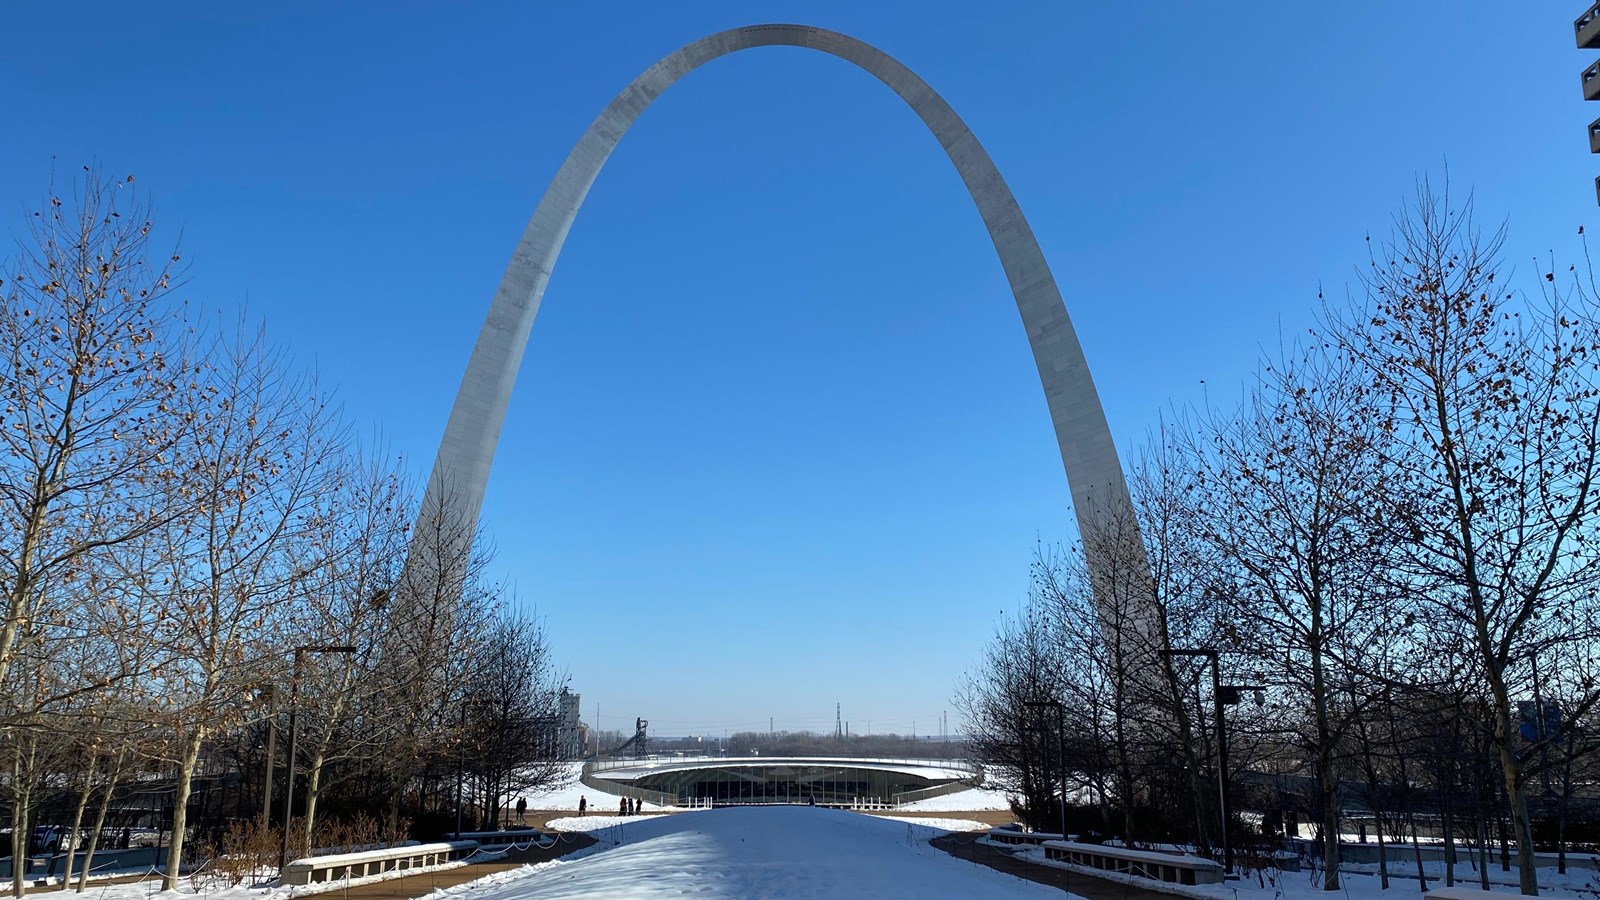 the stainless steel Gateway Arch rises 630 feet over snowy grounds against a clear blue sky